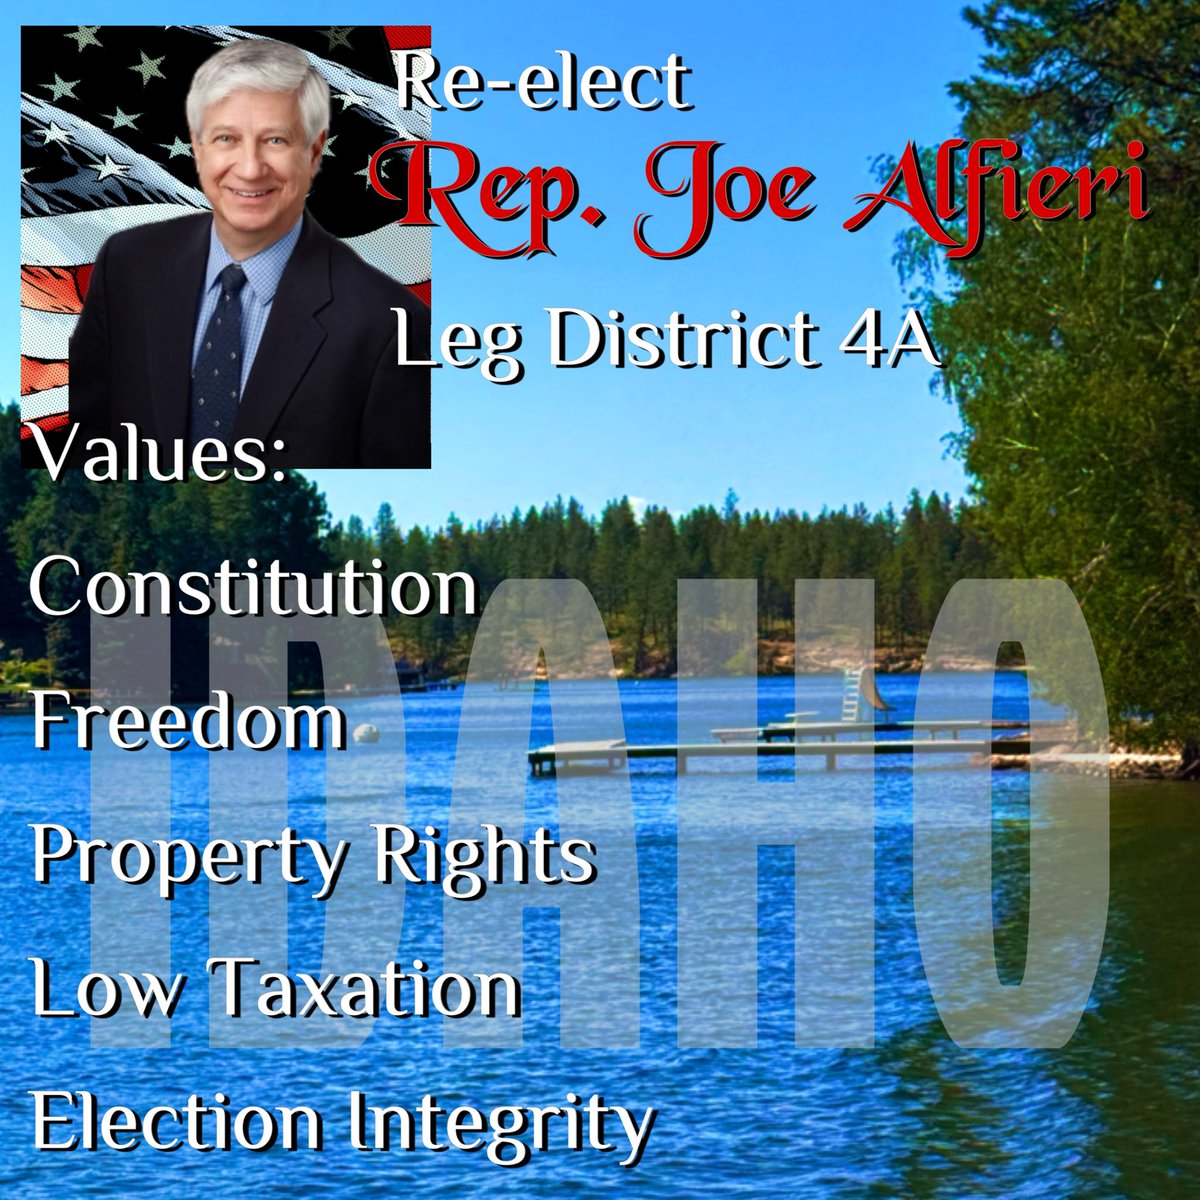 #northernidaho !  If you have an opportunity to vote for @JoeAlfieri1 tomorrow, please make it a priority to go tomorrow and support him.

After all, Joe supports us!  Every one of us with tradition American and Idaho values.

Joe enjoys my strongest support as he fights against